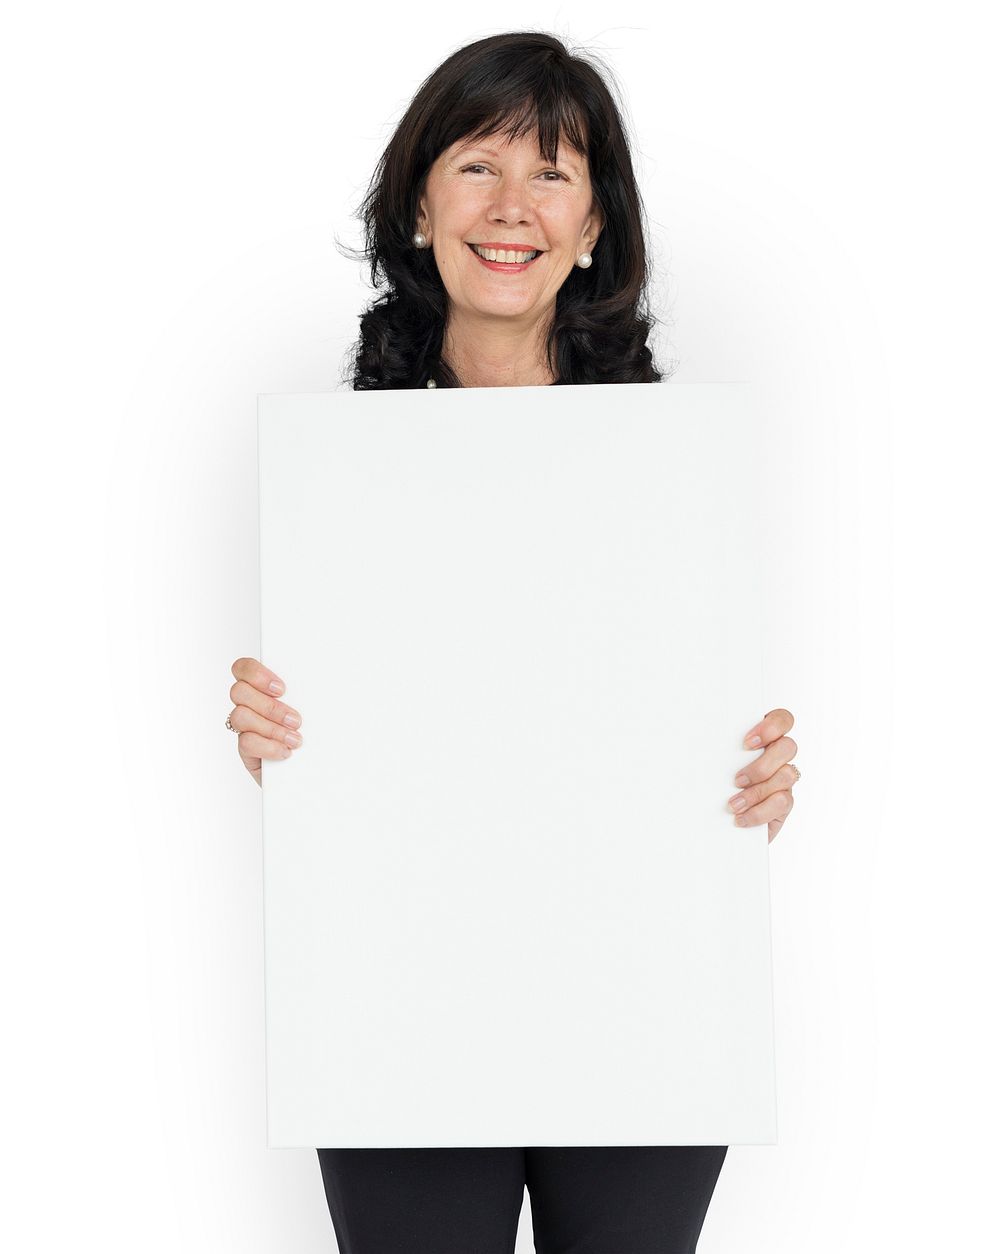 Senior Adult Woman Smiling Holding Banner Copy Space